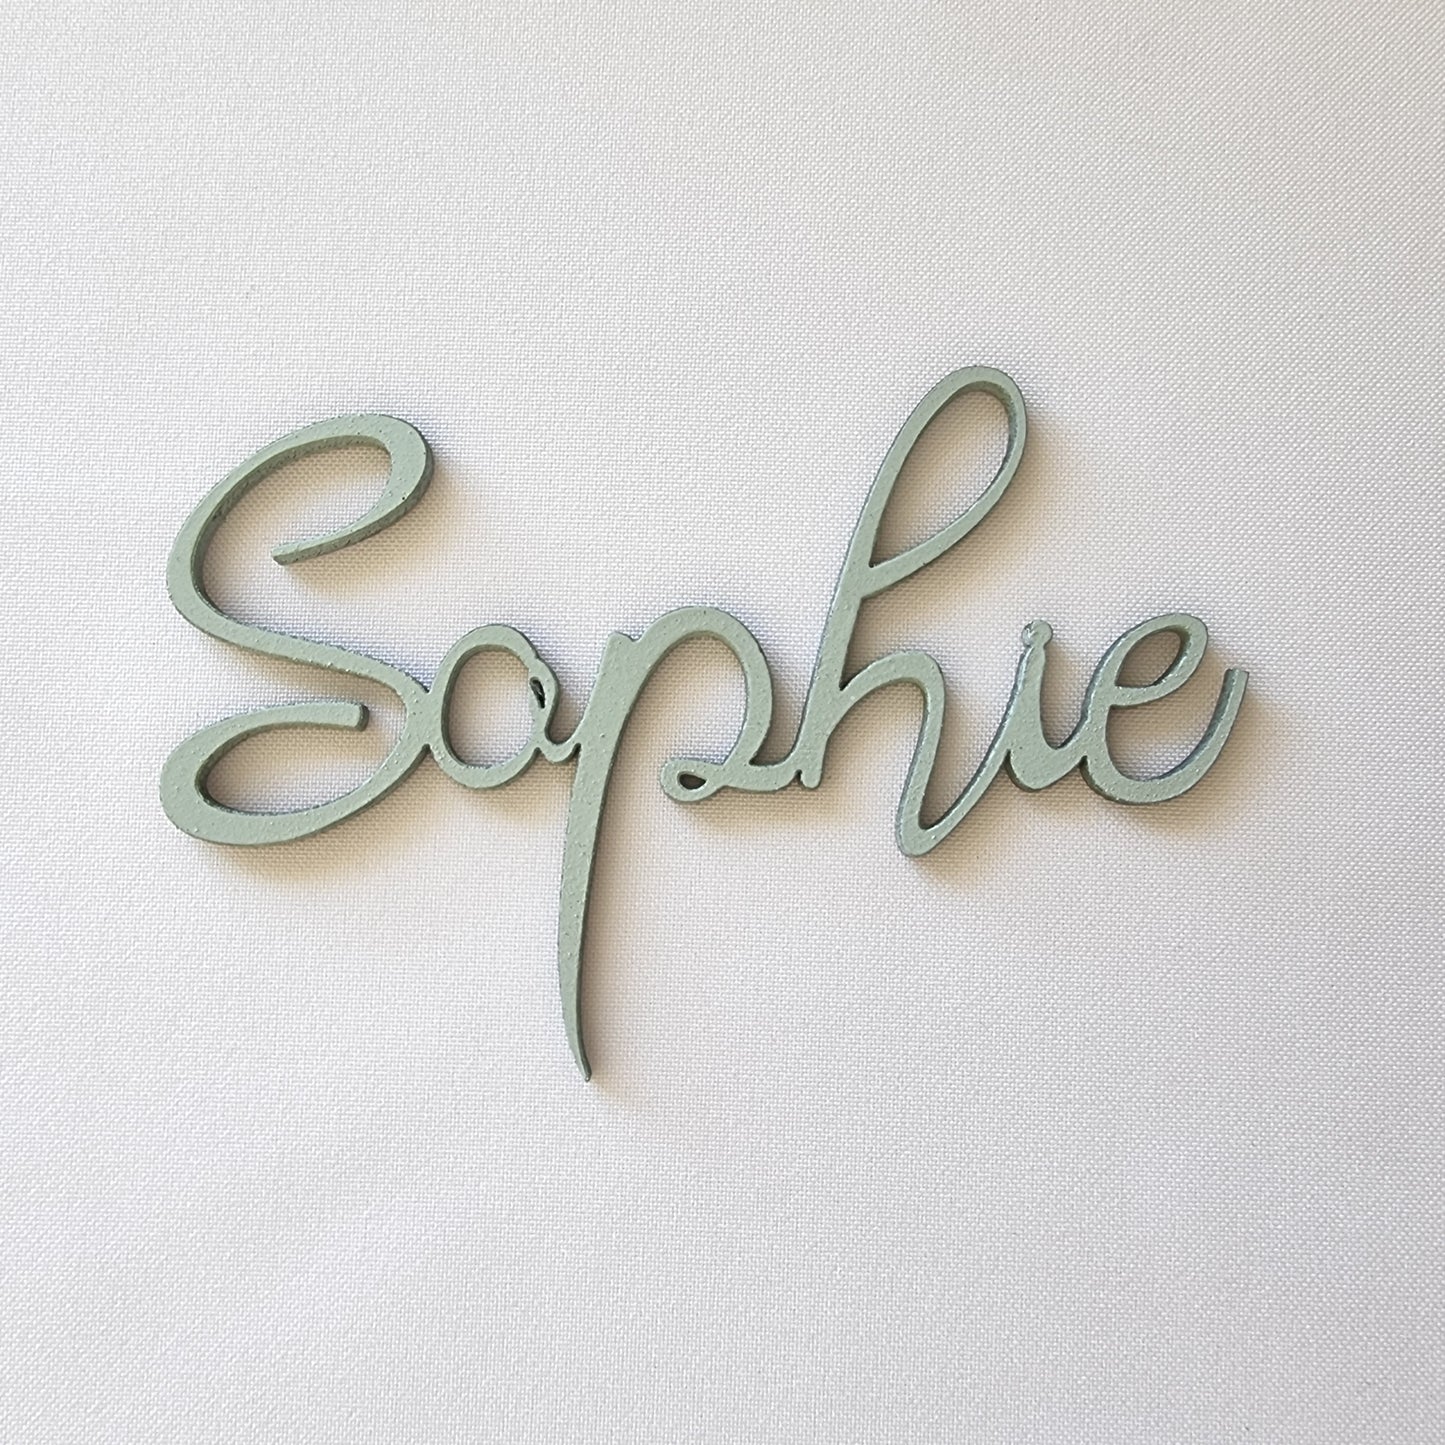 Wooden Place Name Cutouts - Name Cuts | Design Hut